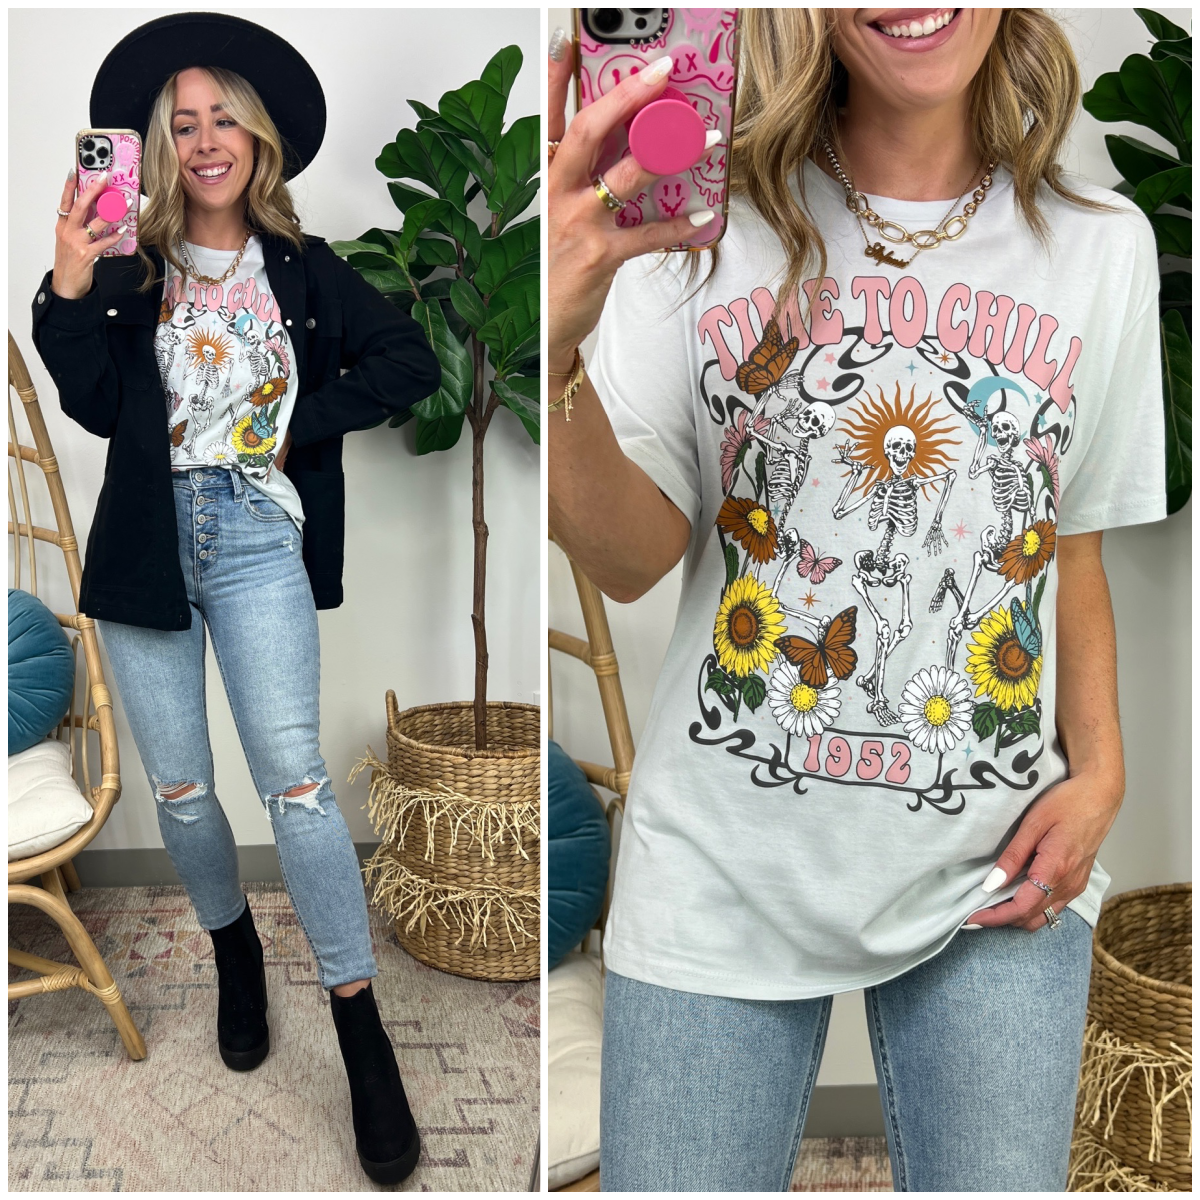  Time to Chill Skeleton Graphic Boyfriend Tee - FINAL SALE - Madison and Mallory